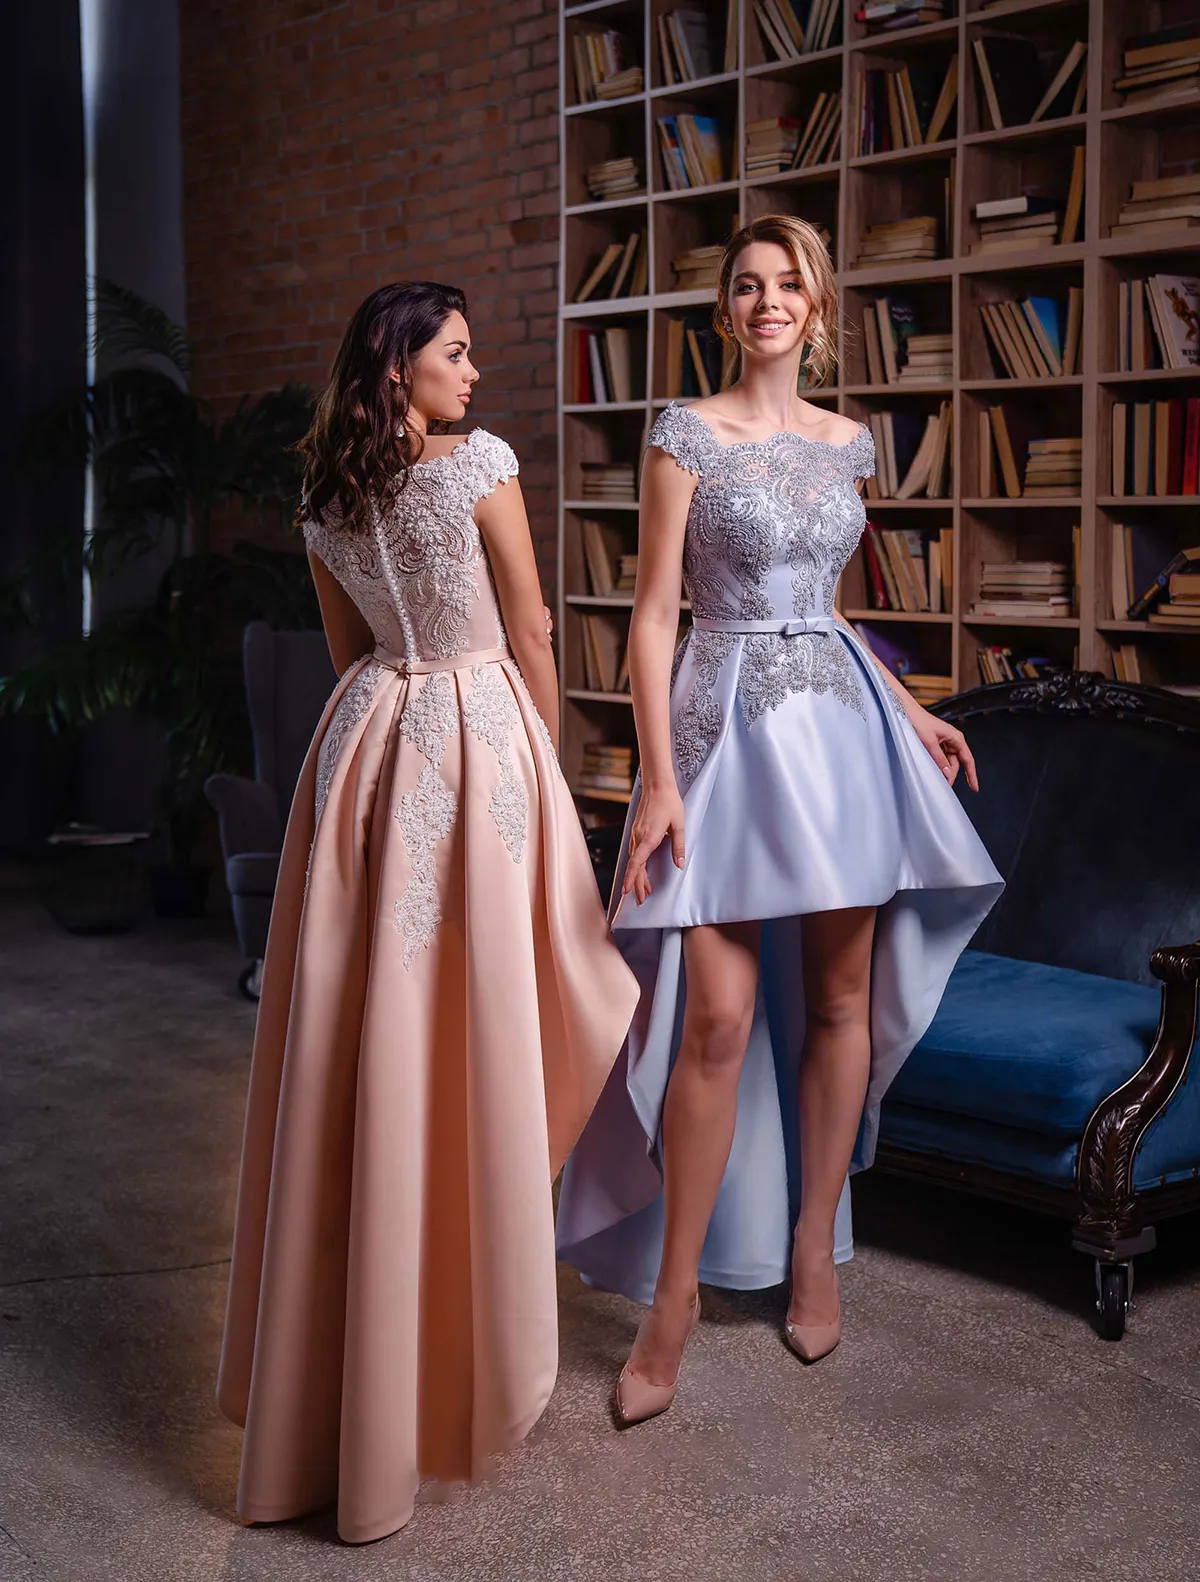 Glamorous Prom Dresses Bateau Off the Shoulder Short Front and Long Back with a Belt Hollow Beaded Applicant Satin Custom Made Evening Dress Plus Size Robes